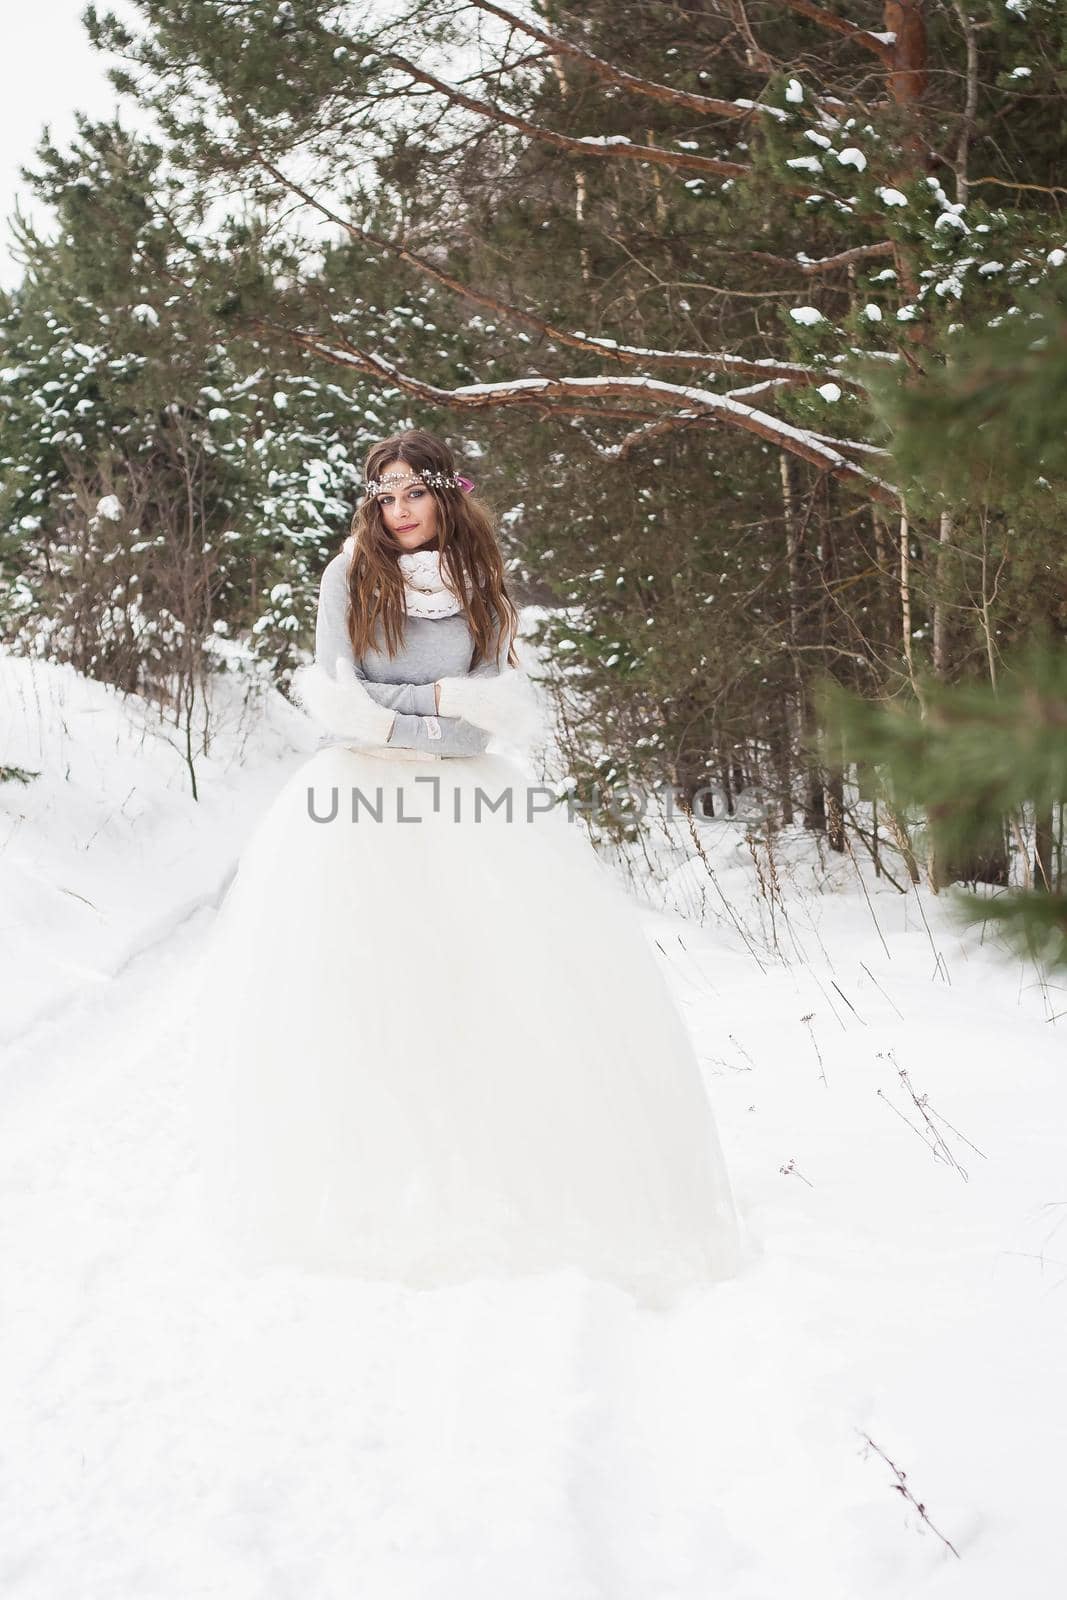 Beautiful bride in a white dress with a bouquet in a snow-covered winter forest. Portrait of the bride in nature by Annu1tochka